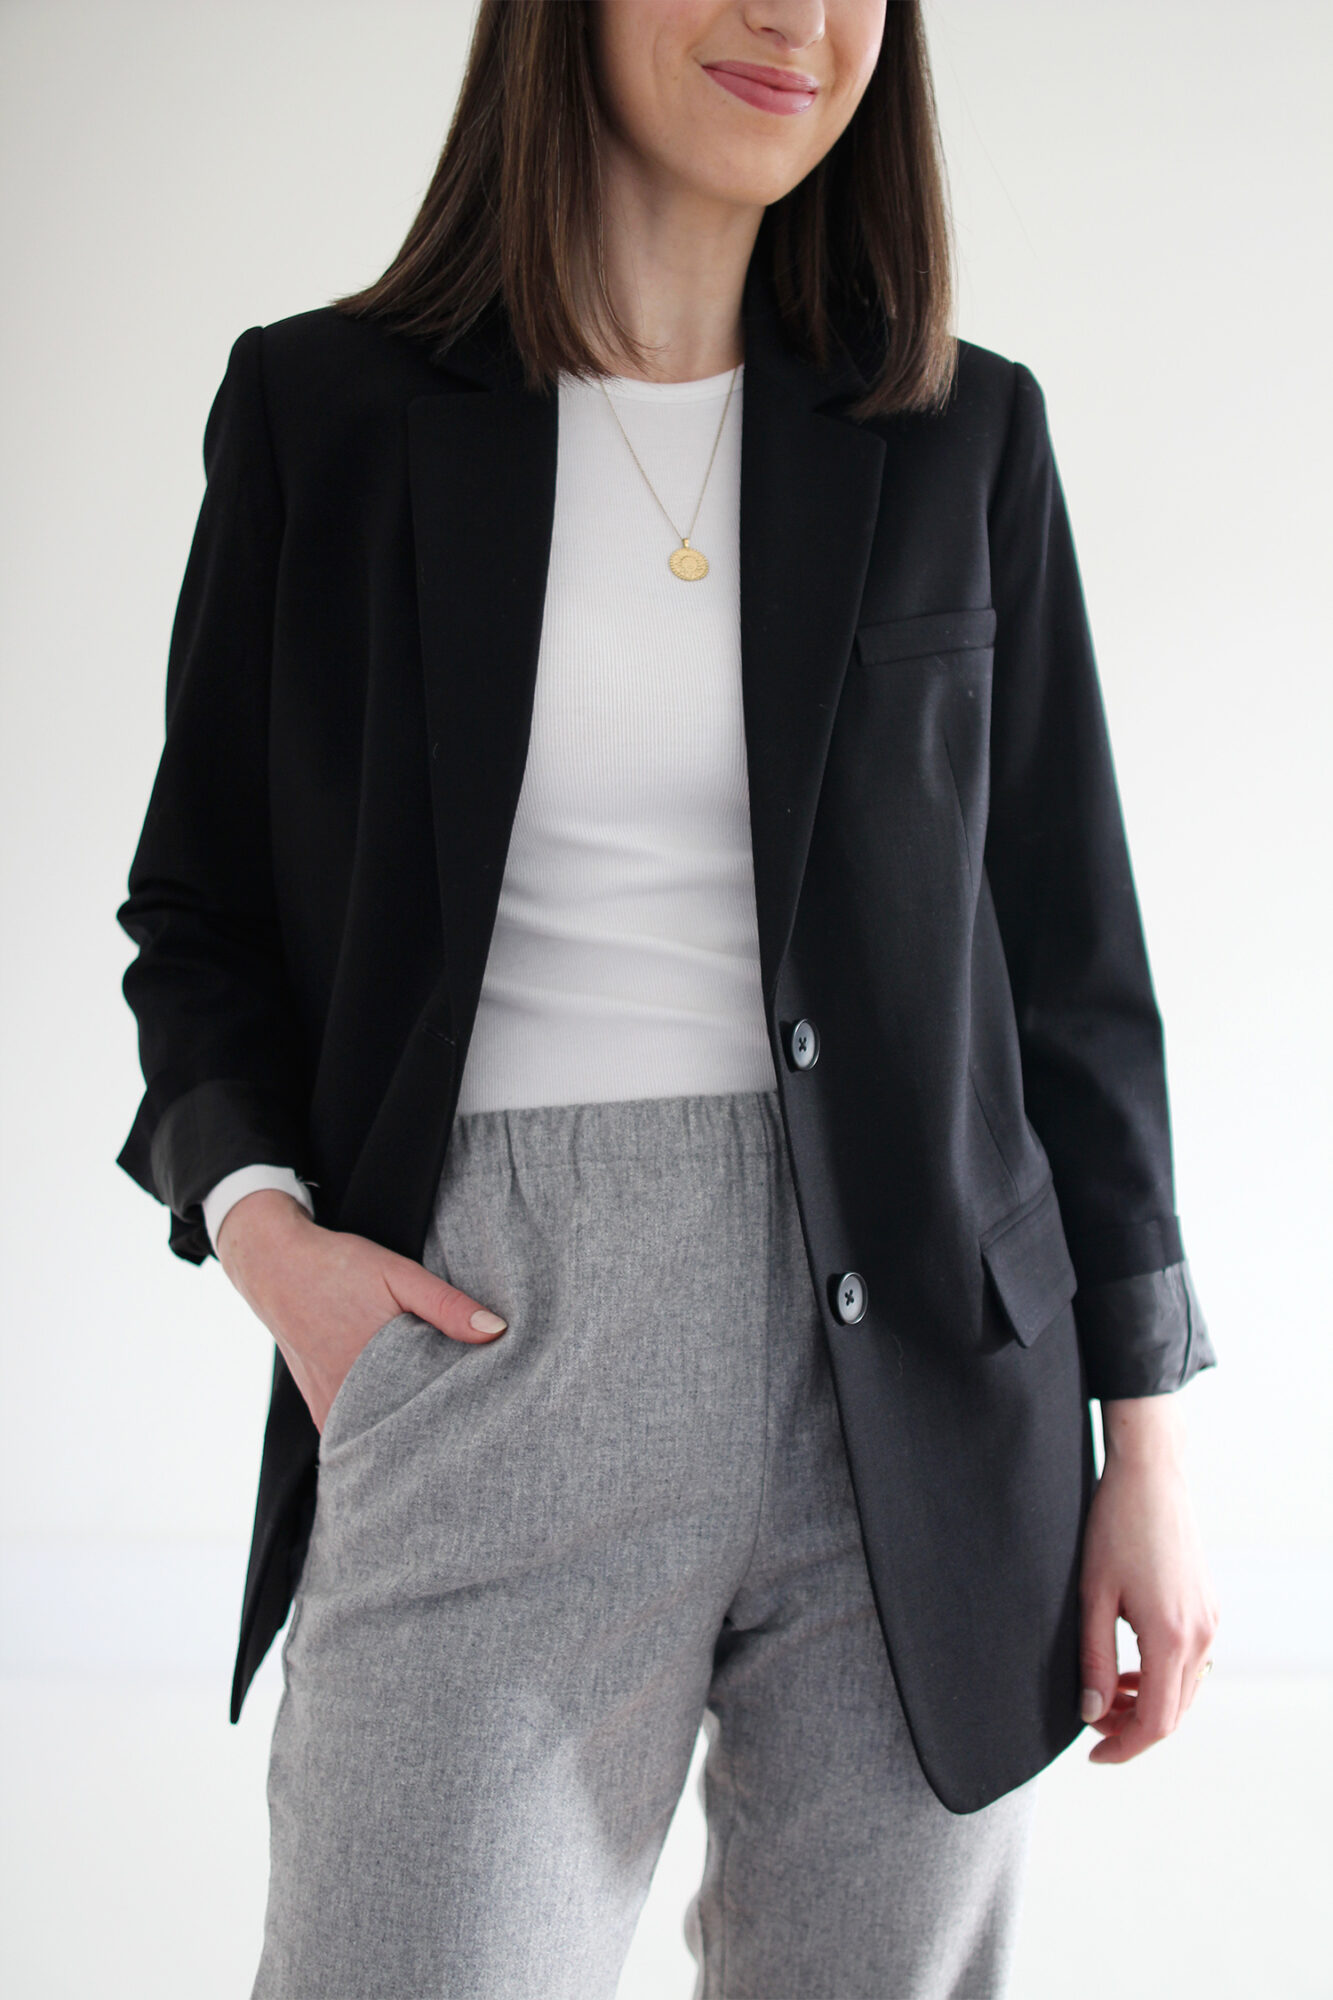 Woman wearing black blazer, white fitted t-shirt, grey joggers, white flats & a gold pendant necklace.